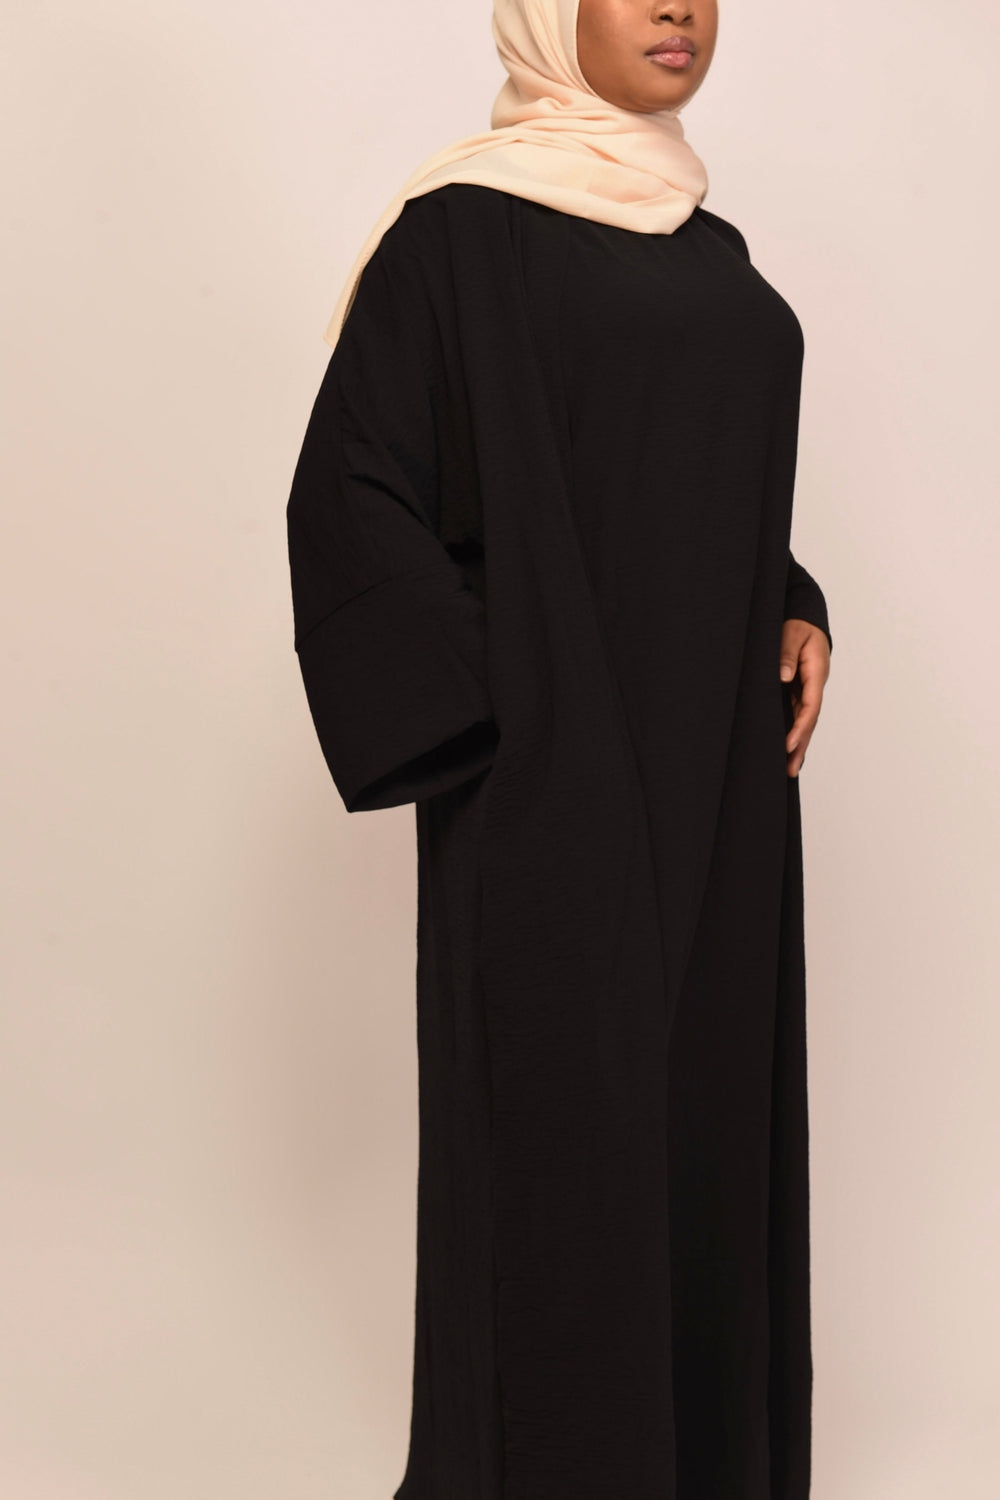 Get trendy with Lea 2-Piece Abaya Set - Black -  available at Voilee NY. Grab yours for $74.90 today!